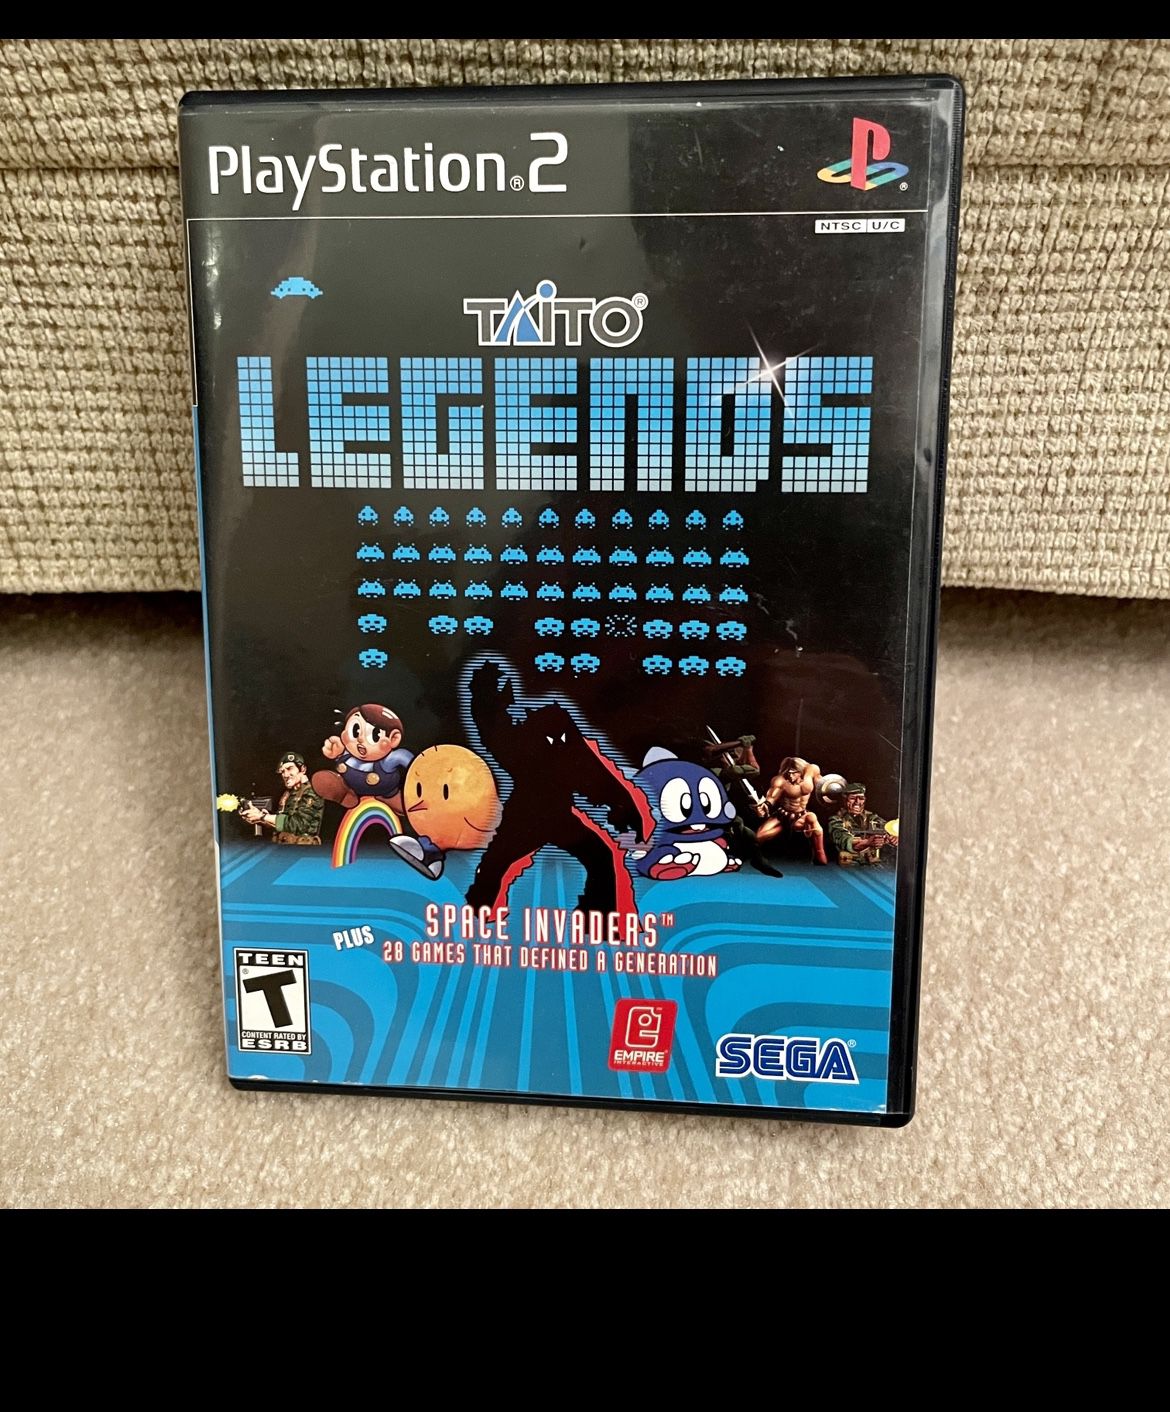 Taito Legends Playstation 2 PS2 Video Game For System Console Cleaned Works Disc Case Manual Retro Old School Gaming 